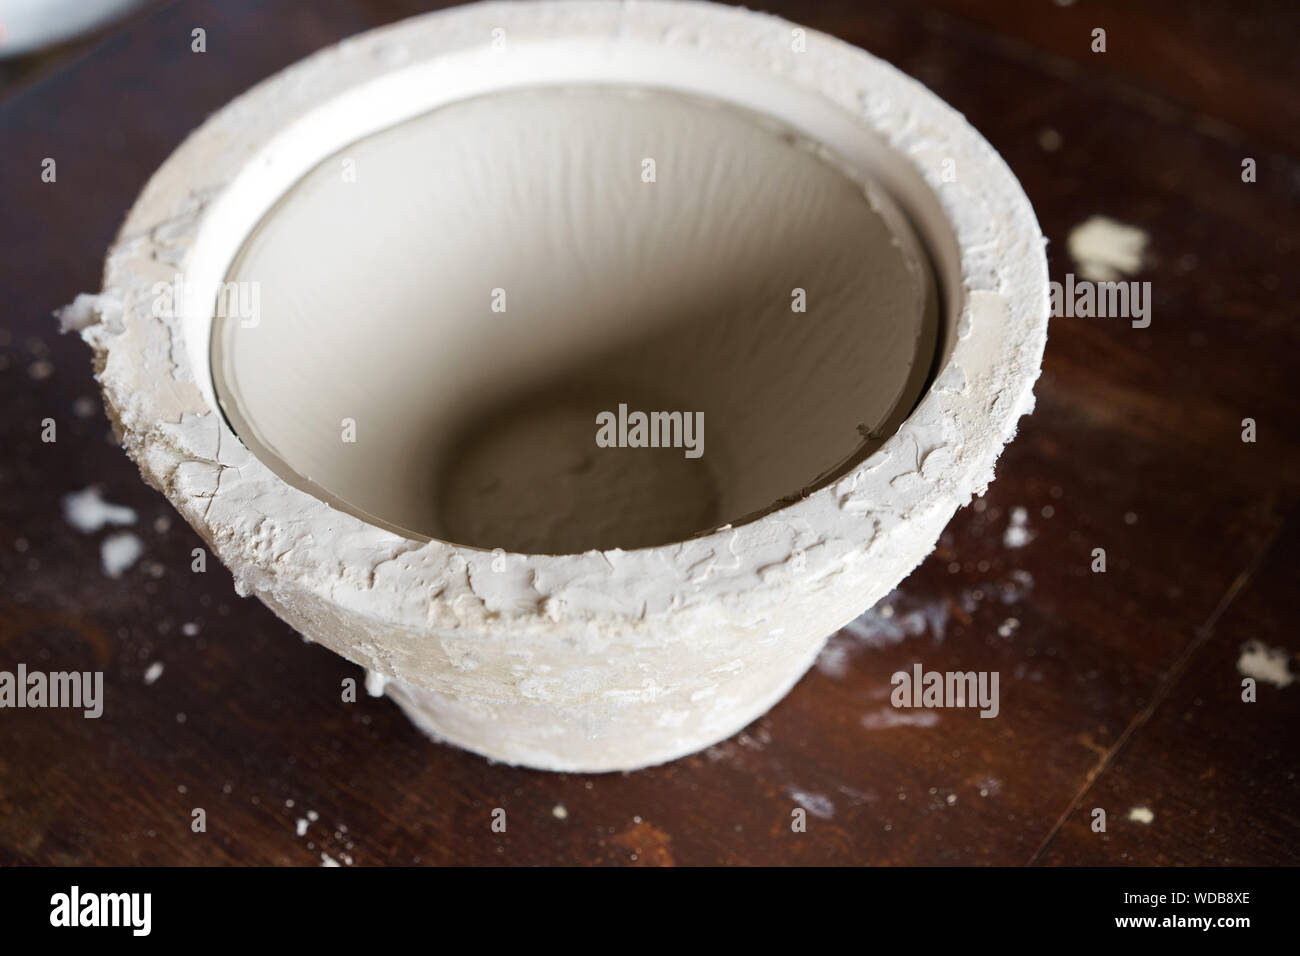 Mold for casting clay products with a finished bowl inside Stock Photo